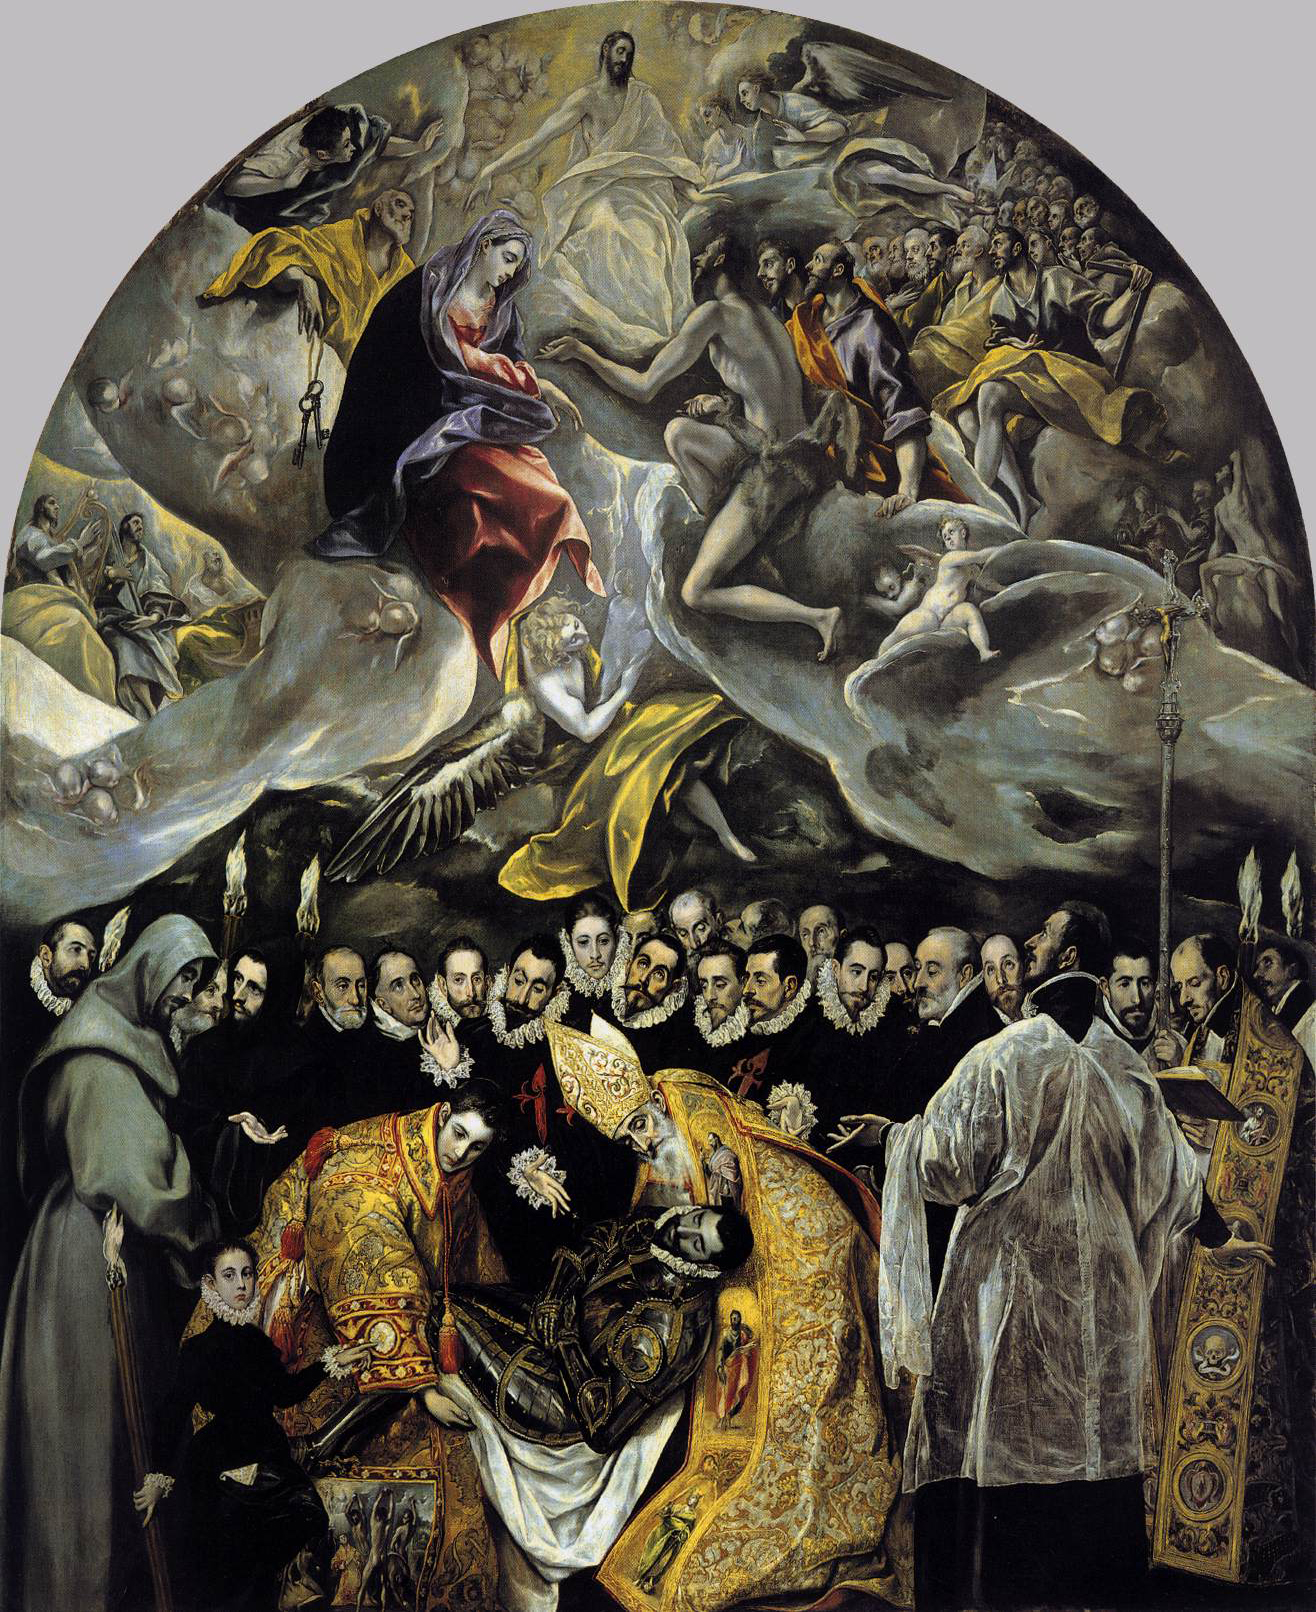 The Burial of the Count of Orgaz" by El Greco (1586-1588)